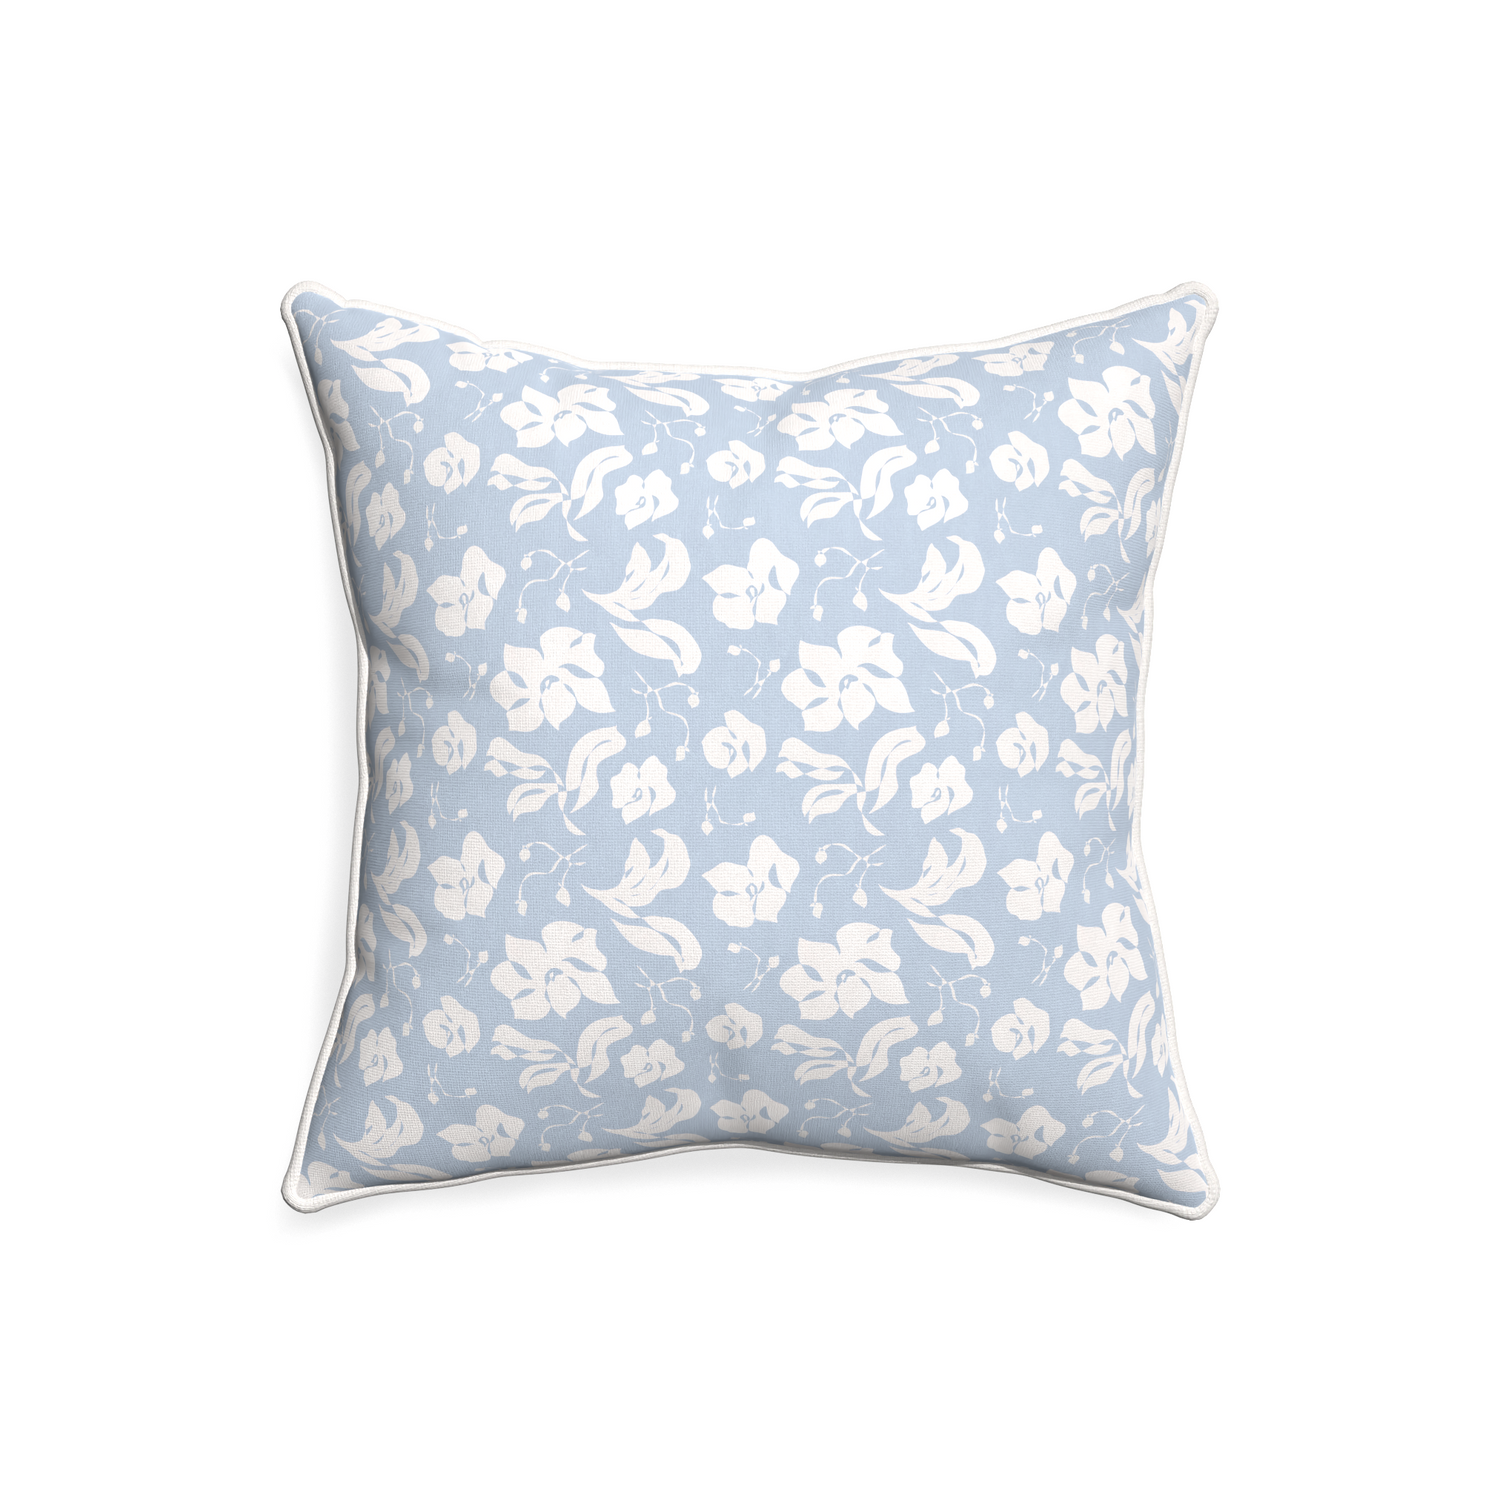 20-square georgia custom pillow with snow piping on white background